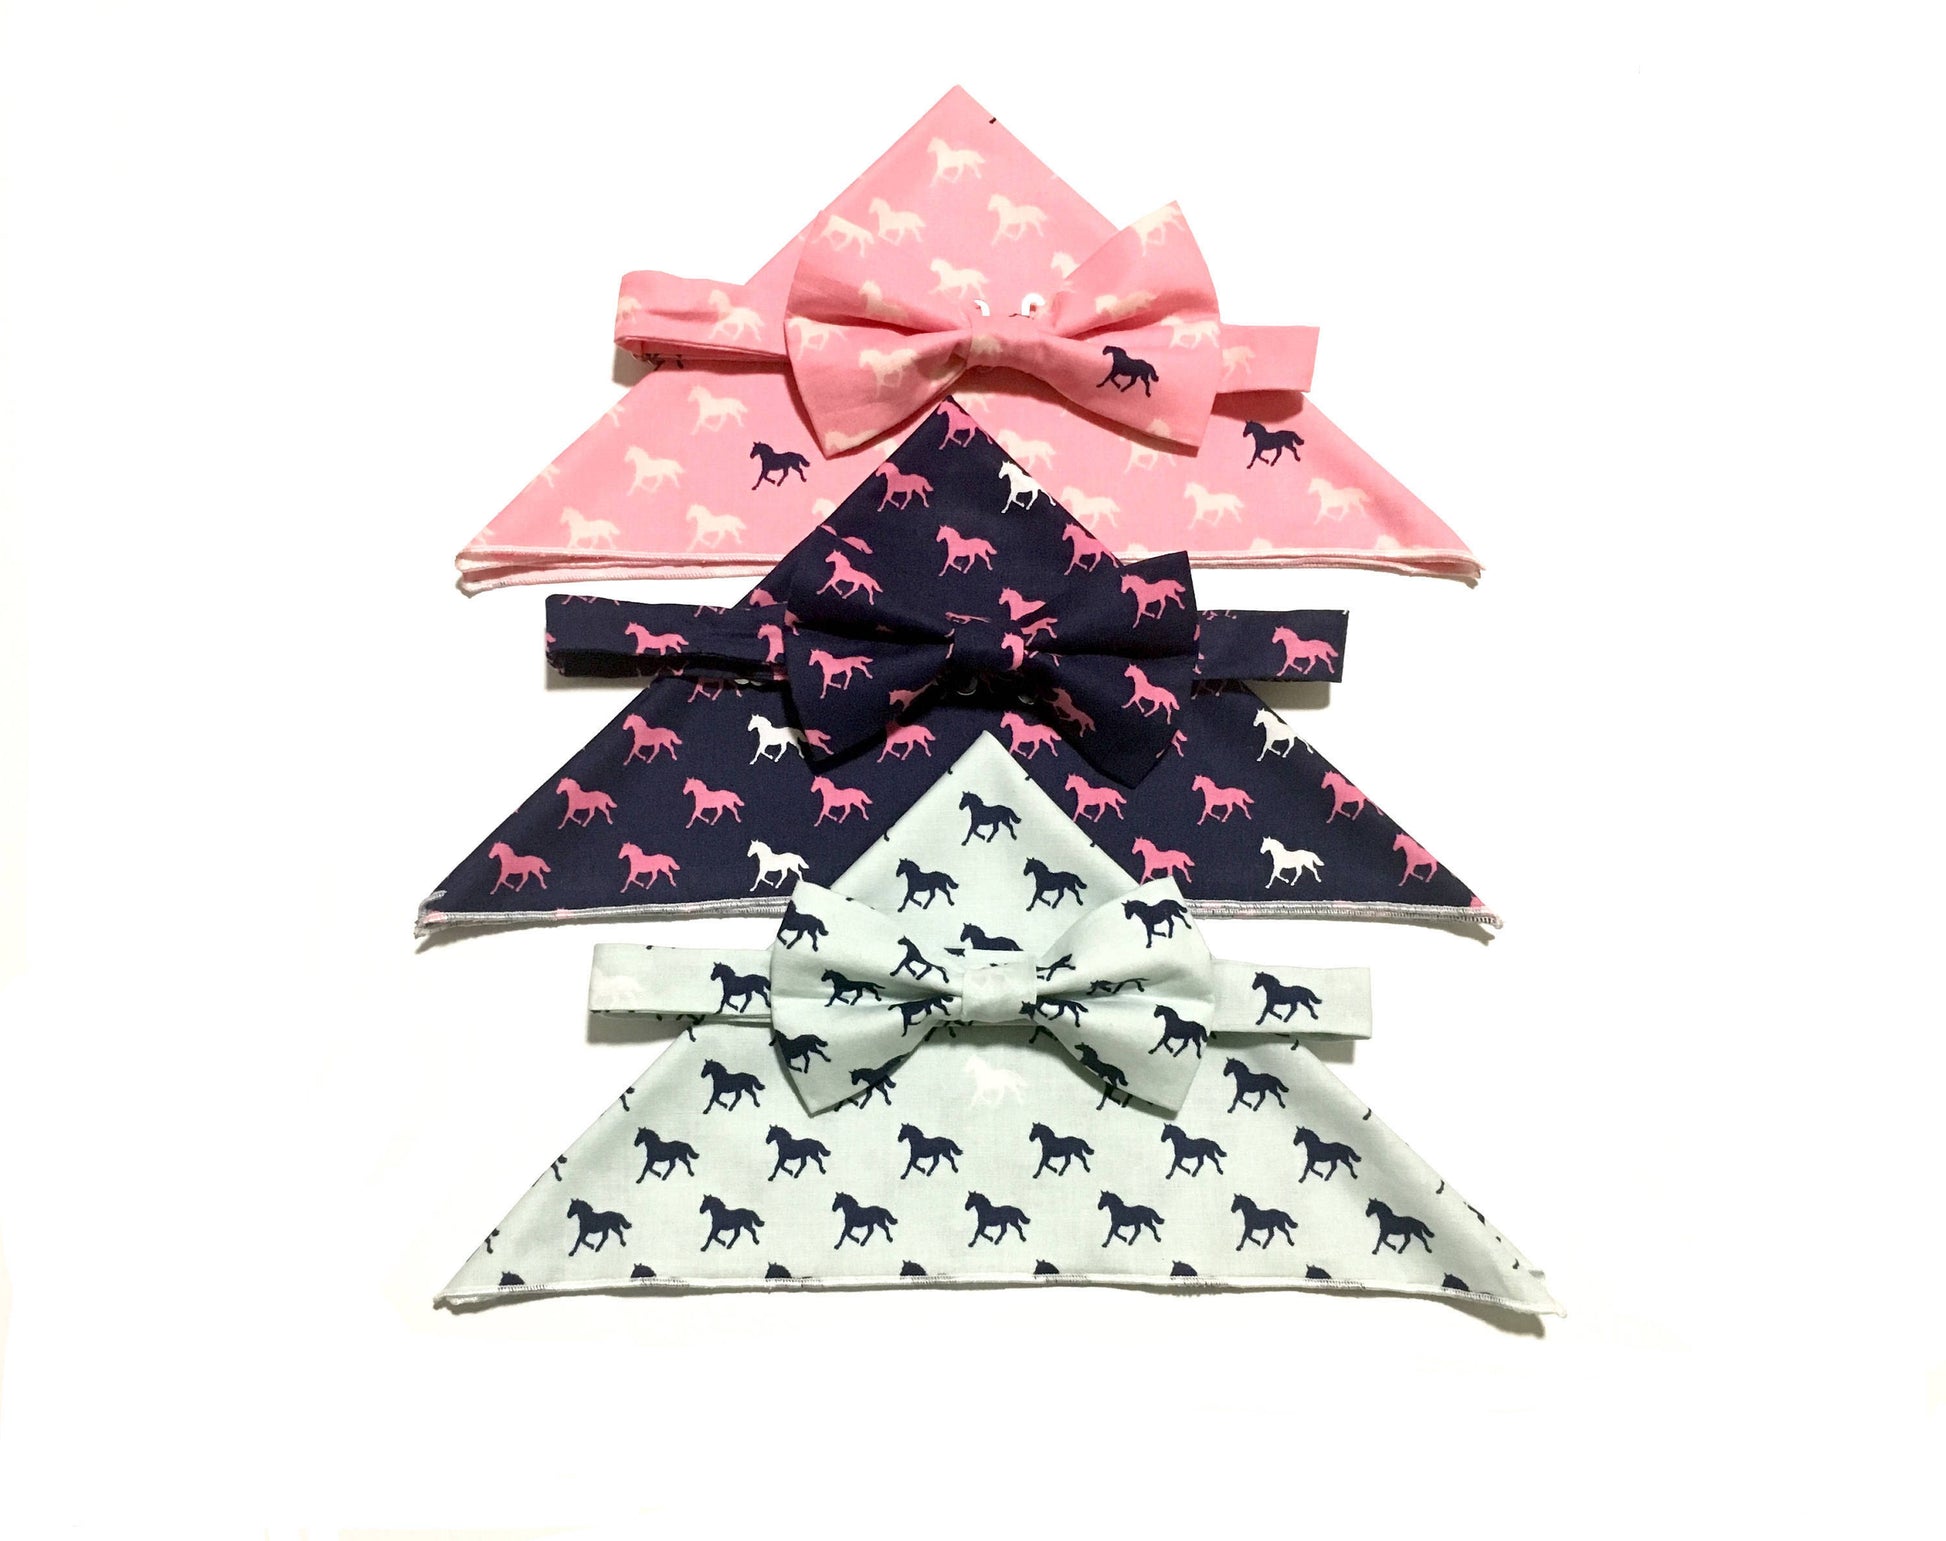 Men’s and boys derby horses print pre-tied bow ties with matching pocket squares in the colors aqua, pink and navy with different colored horses on the print.